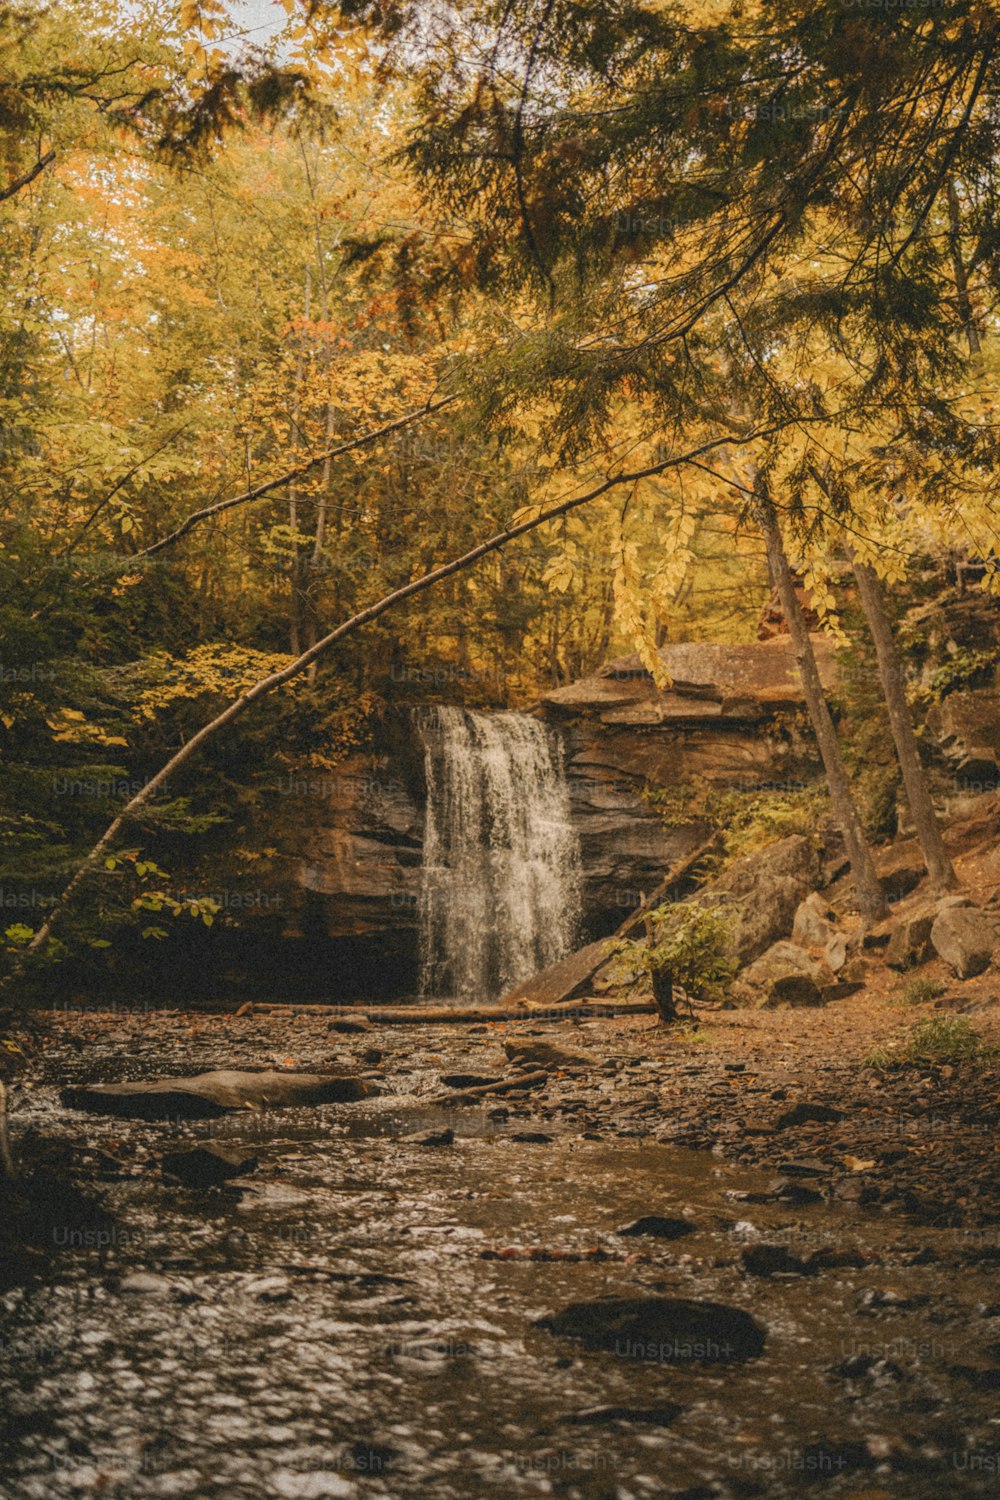 a waterfall in the woods with a man standing next to it